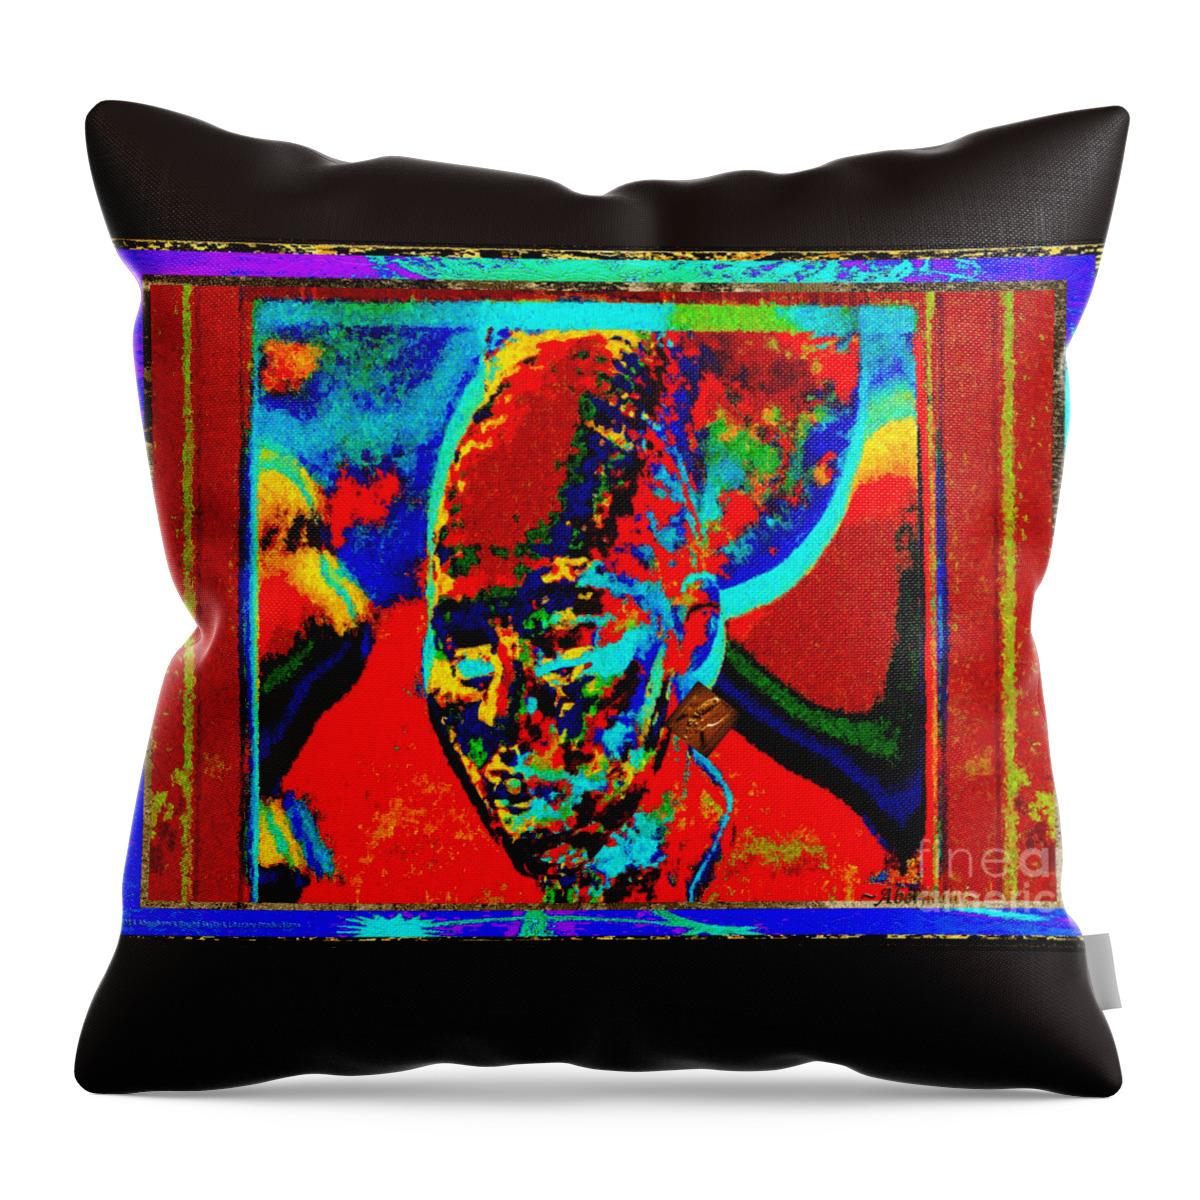 Harlem Renaissance Throw Pillow featuring the painting Woman Whose Dreams Kept Hope Alive by Aberjhani